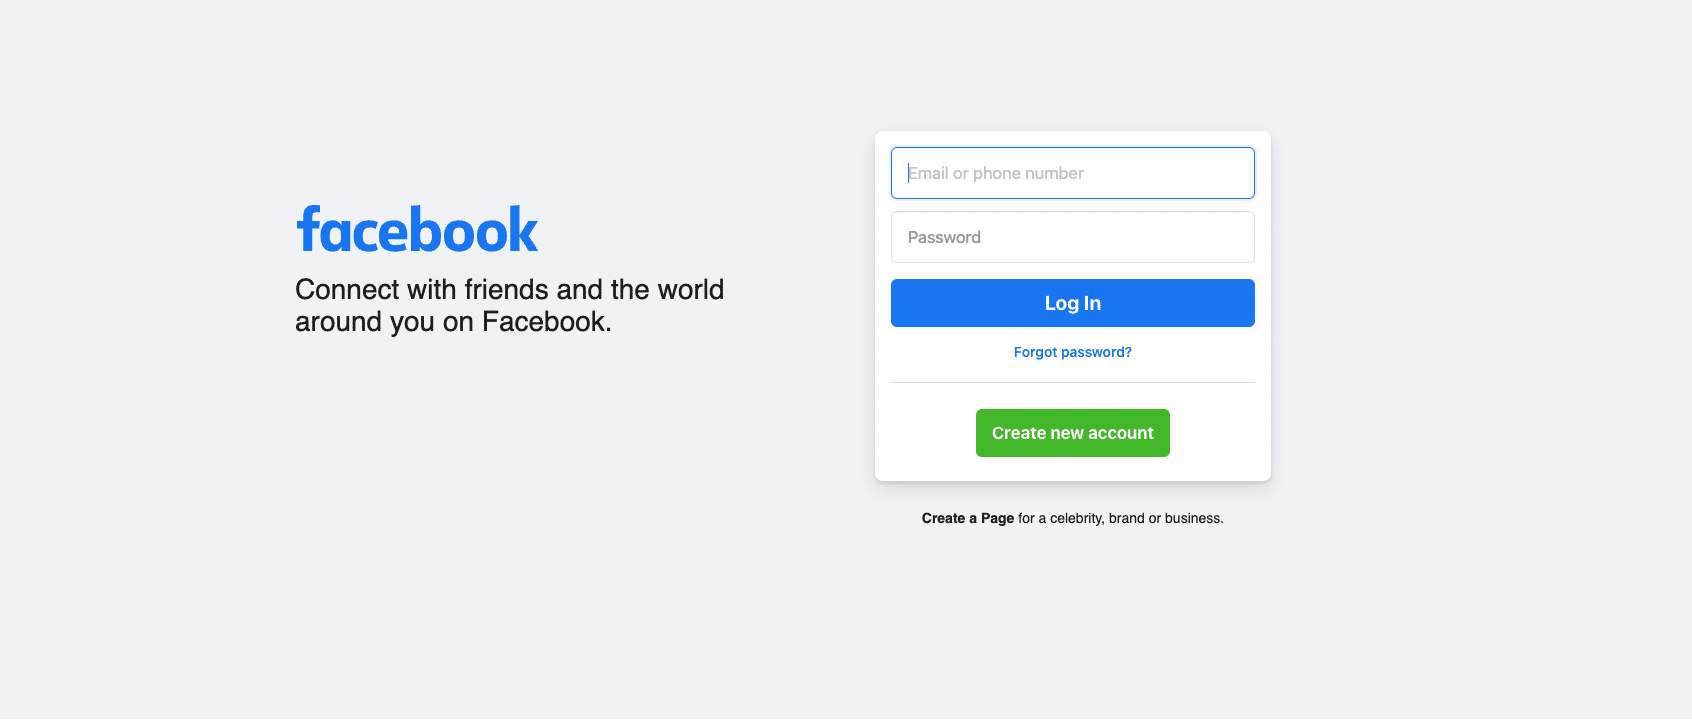 How to set up a secure and private Facebook account